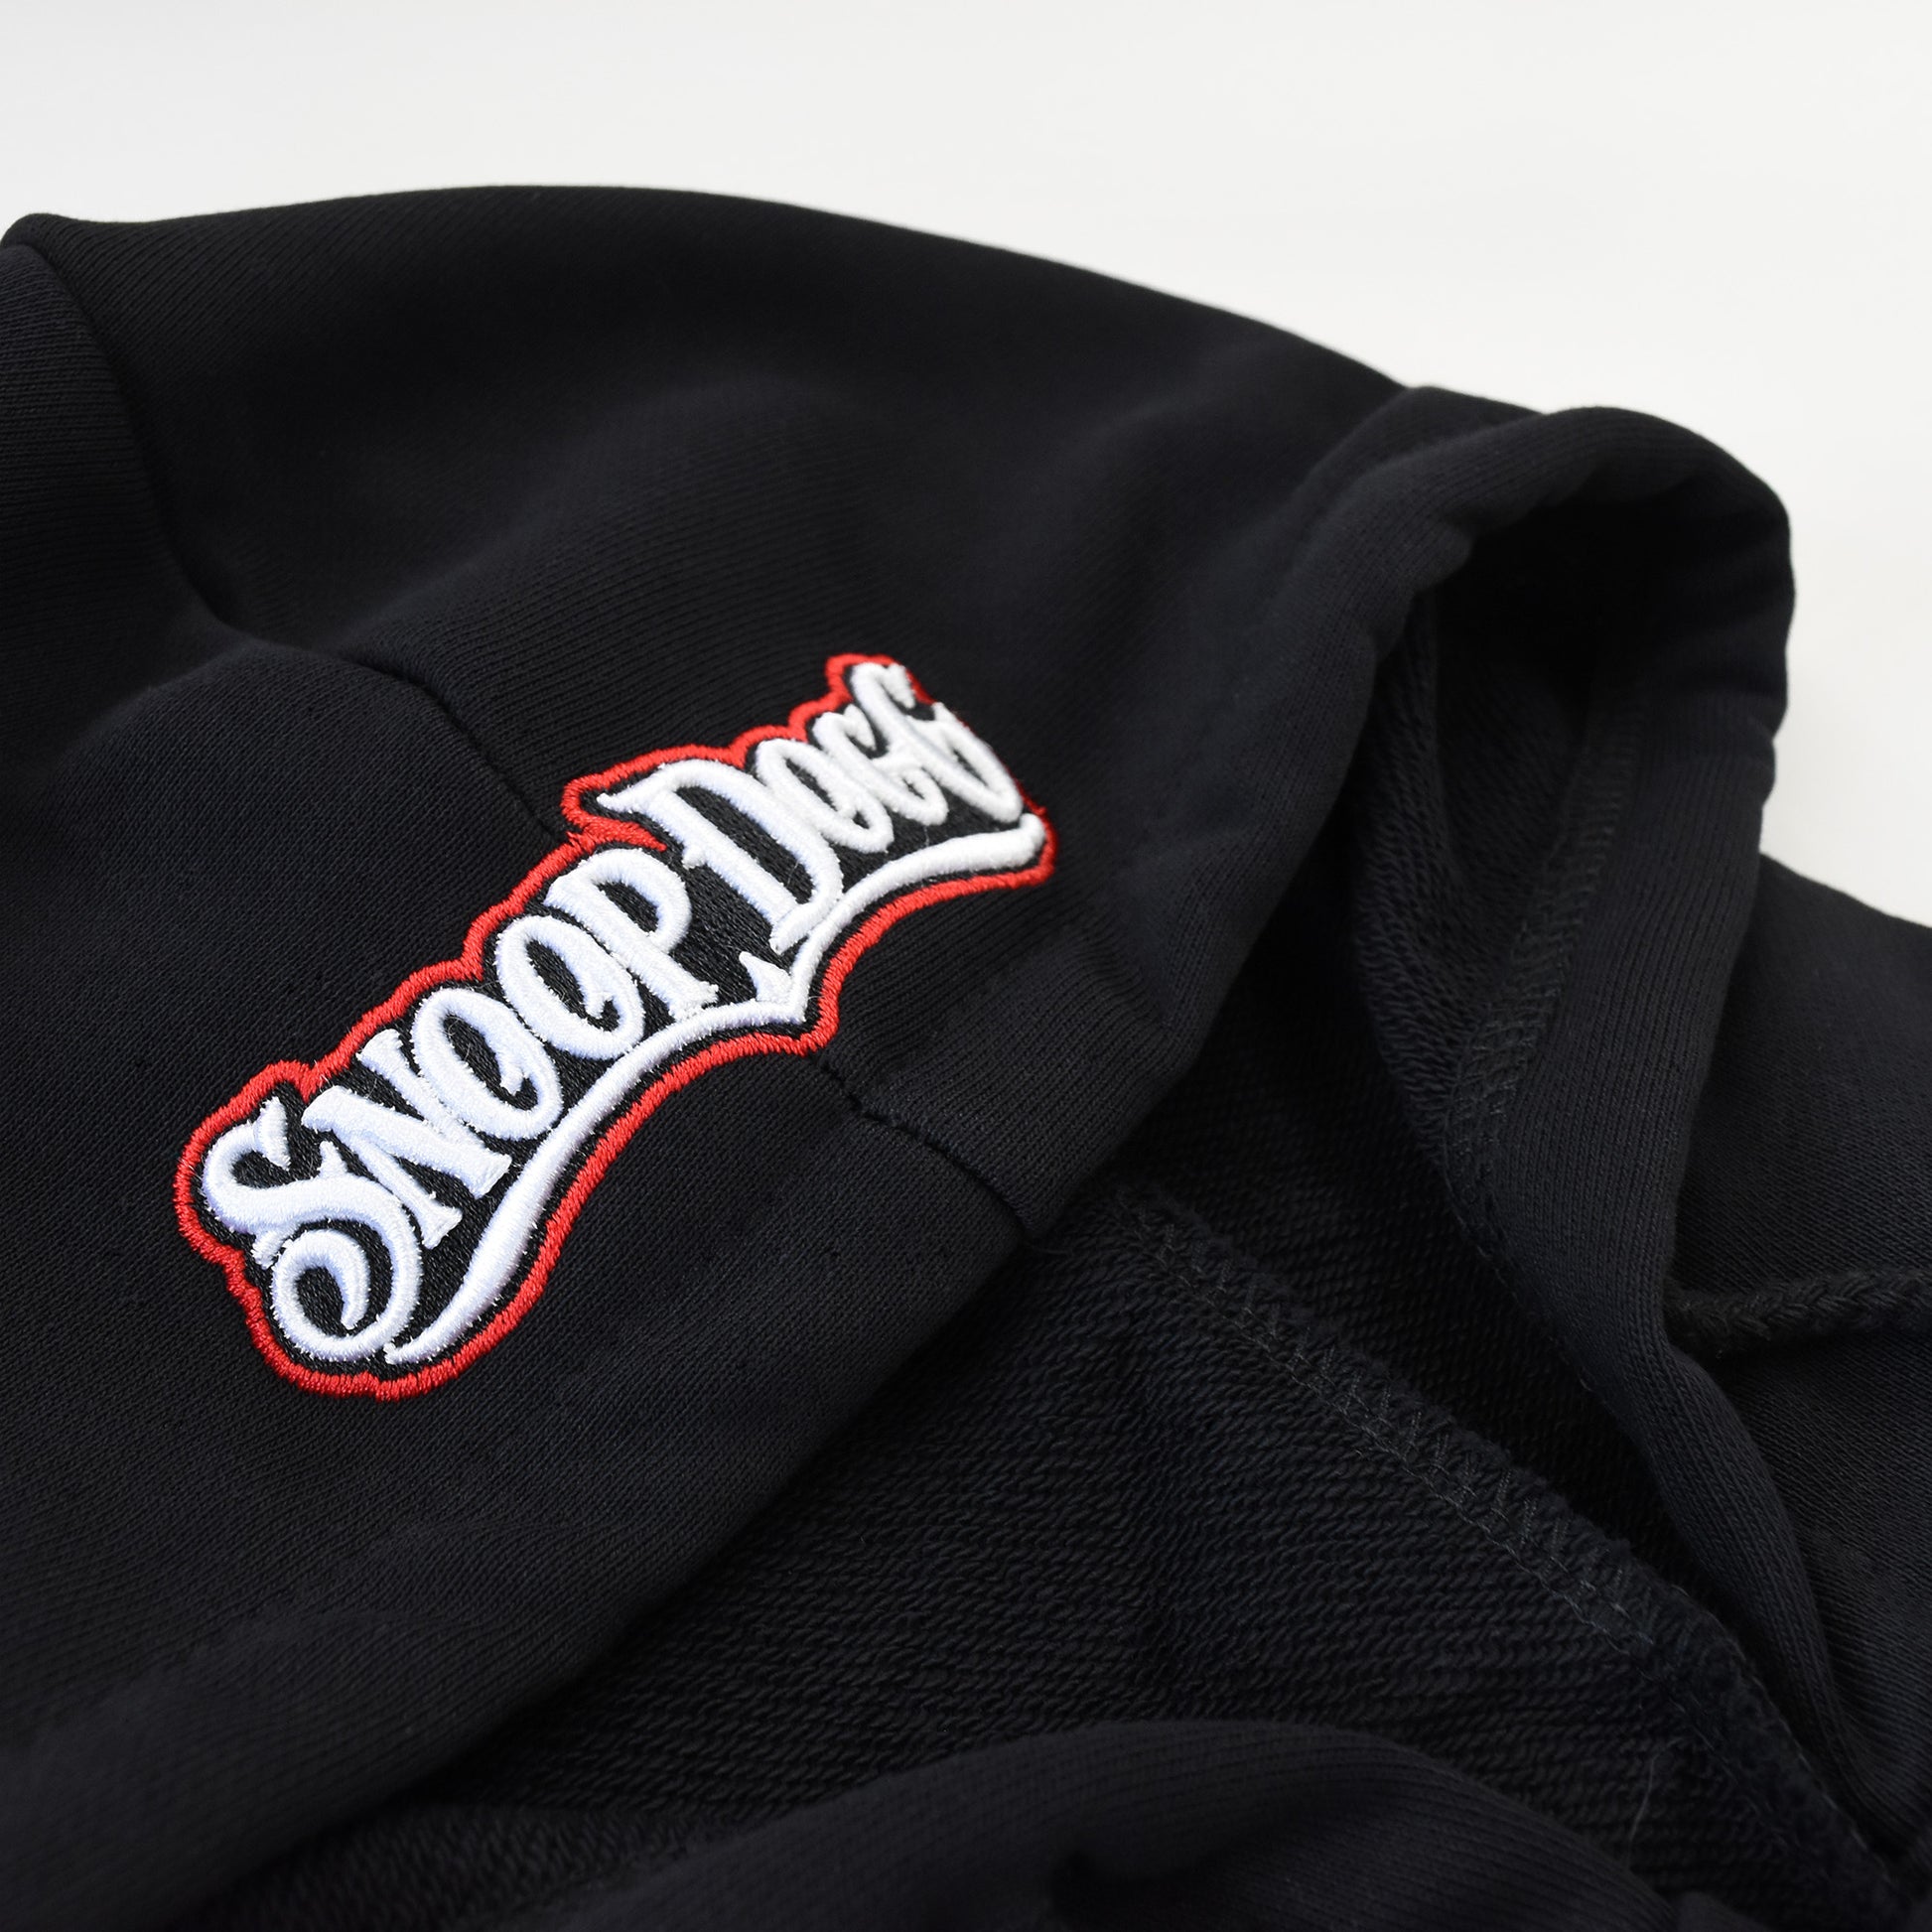 A close up detail image of the Snoop Dogg embroidered logo on the hood of the Mic Drop Deluxe Pet Hoodie.